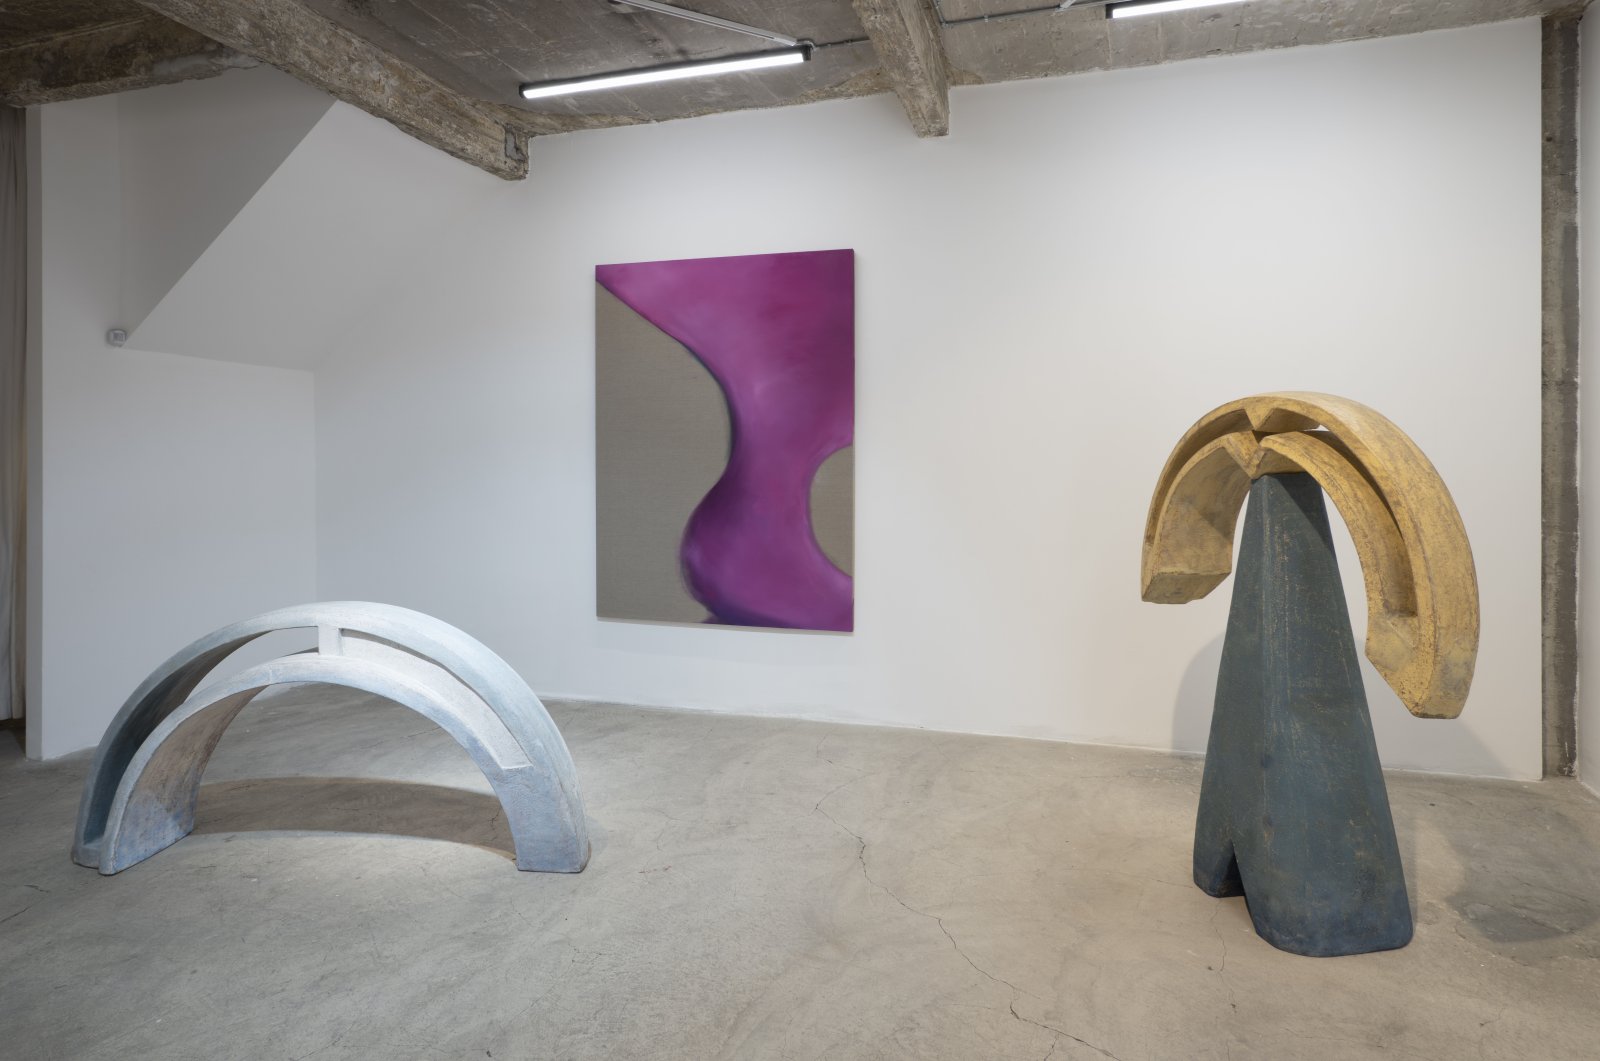 An installation view from "Trunkless" at Öktem Aykut shows works by Koray Ariş and Aret Gıcır. (Courtesy of Öktem Aykut)